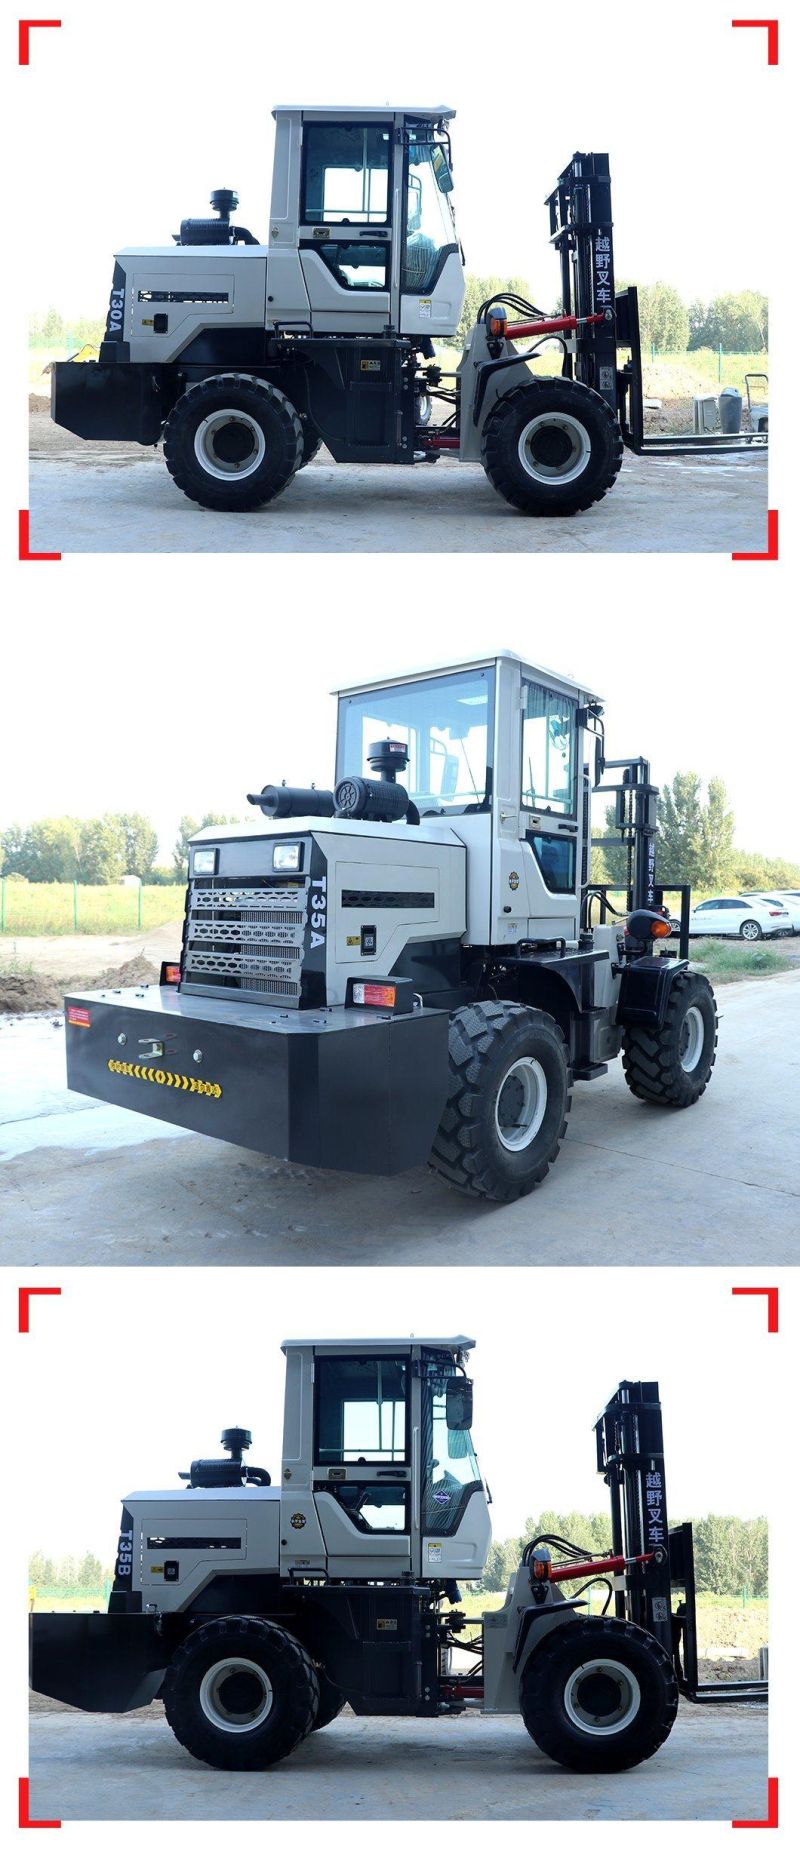 Mountain Crane Loader Internal Combustion Four-Wheel Drive Cross-Country Forklift 5 Tons Diesel Forklift Hydraulic Forklift